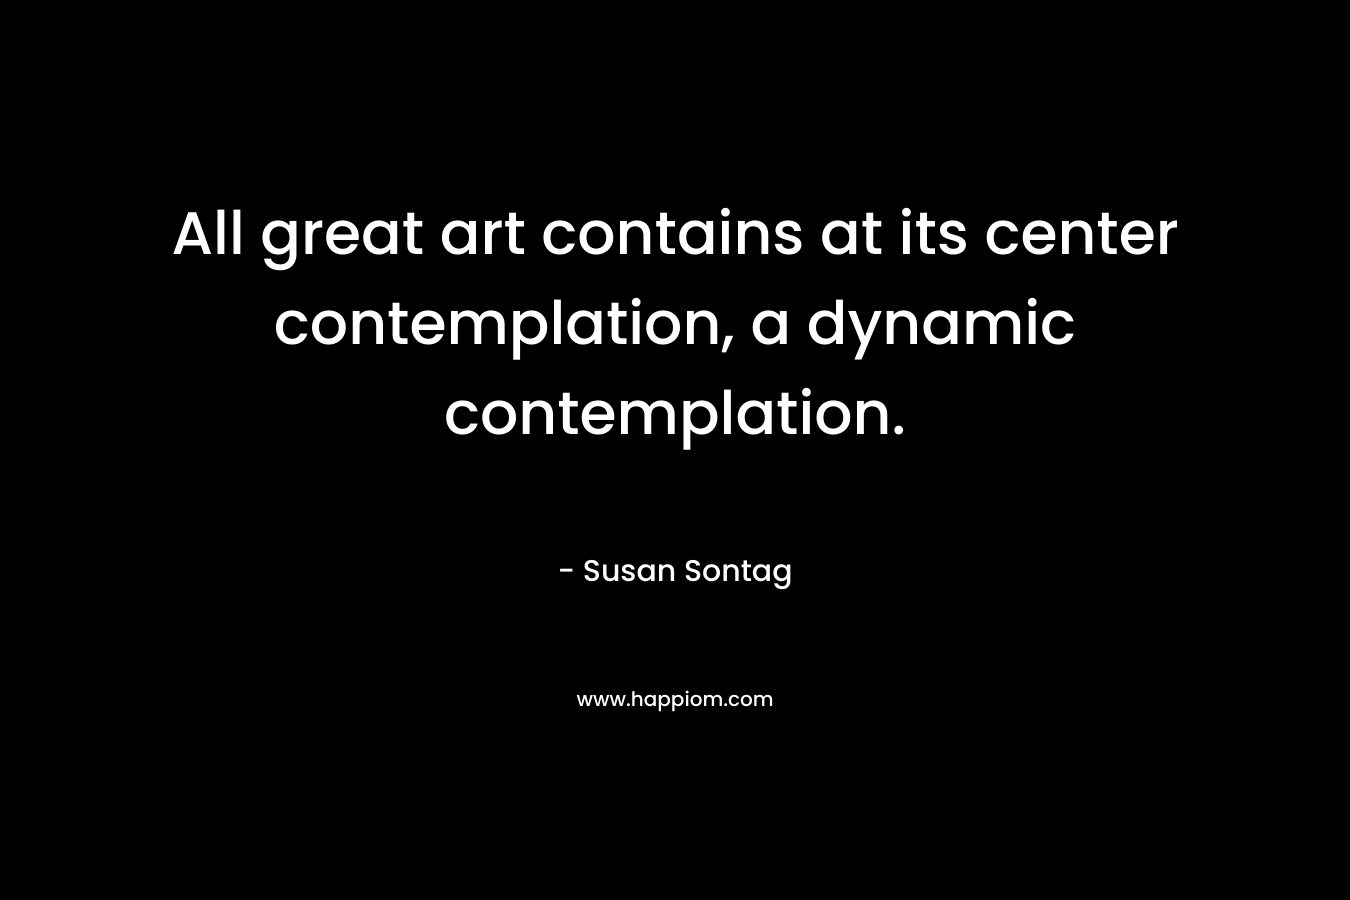 All great art contains at its center contemplation, a dynamic contemplation. – Susan Sontag